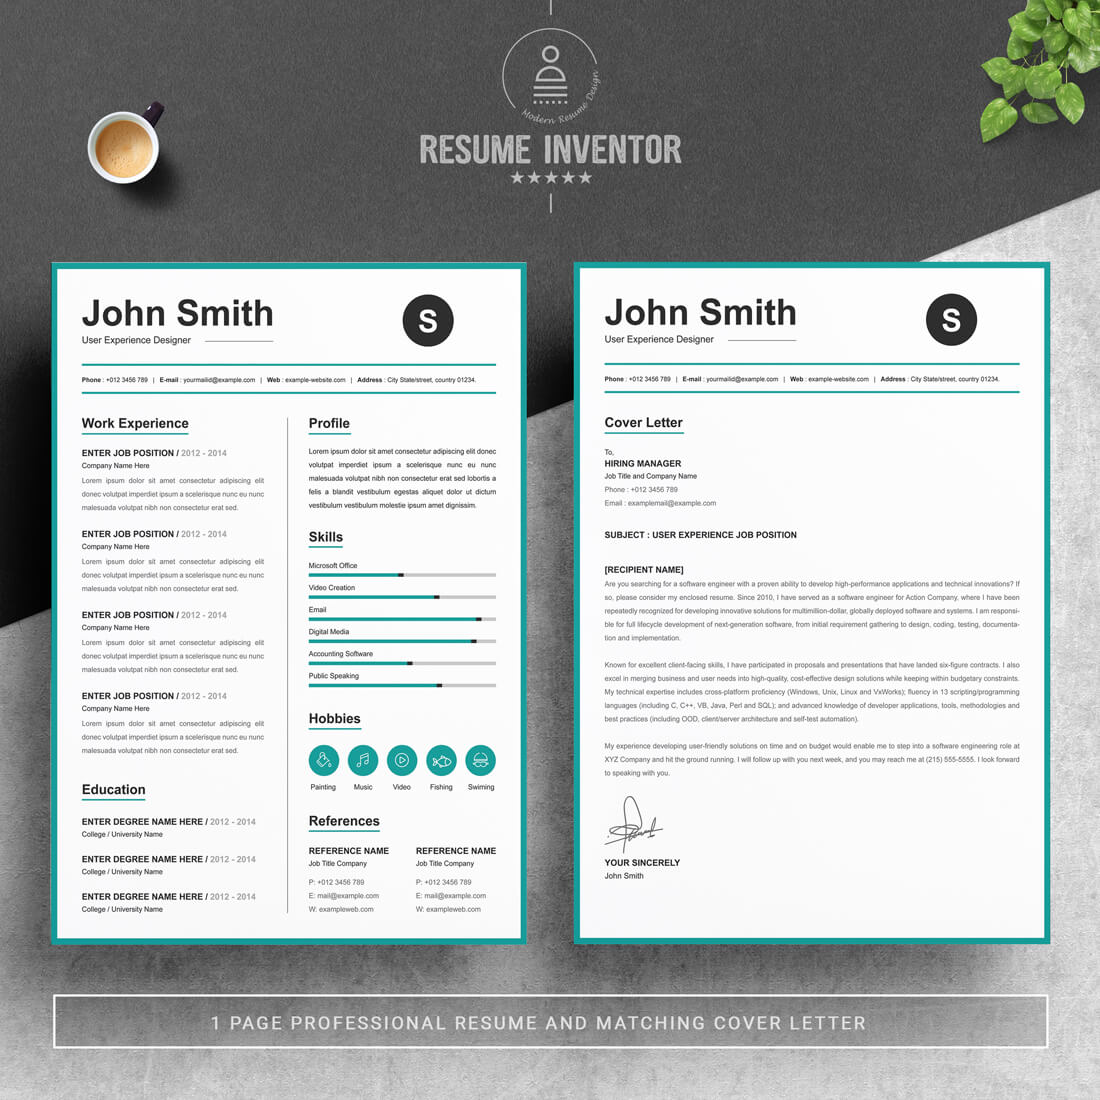 Professional resume template with a green border.